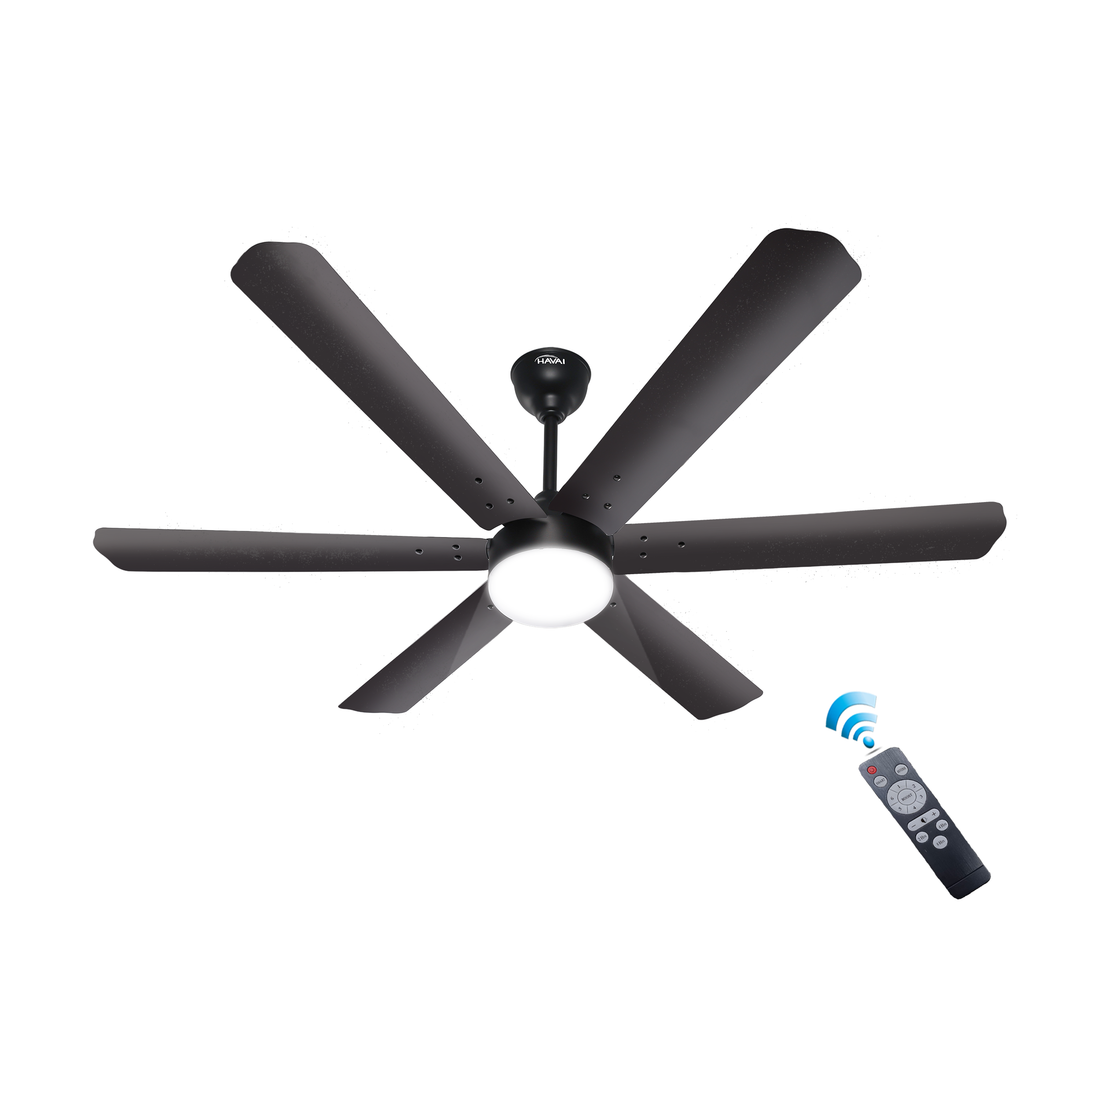 HAVAI Spinel BLDC Ceiling Fan 35W, 1200mm Blade with Remote - Smoky Brown,9W LED Light